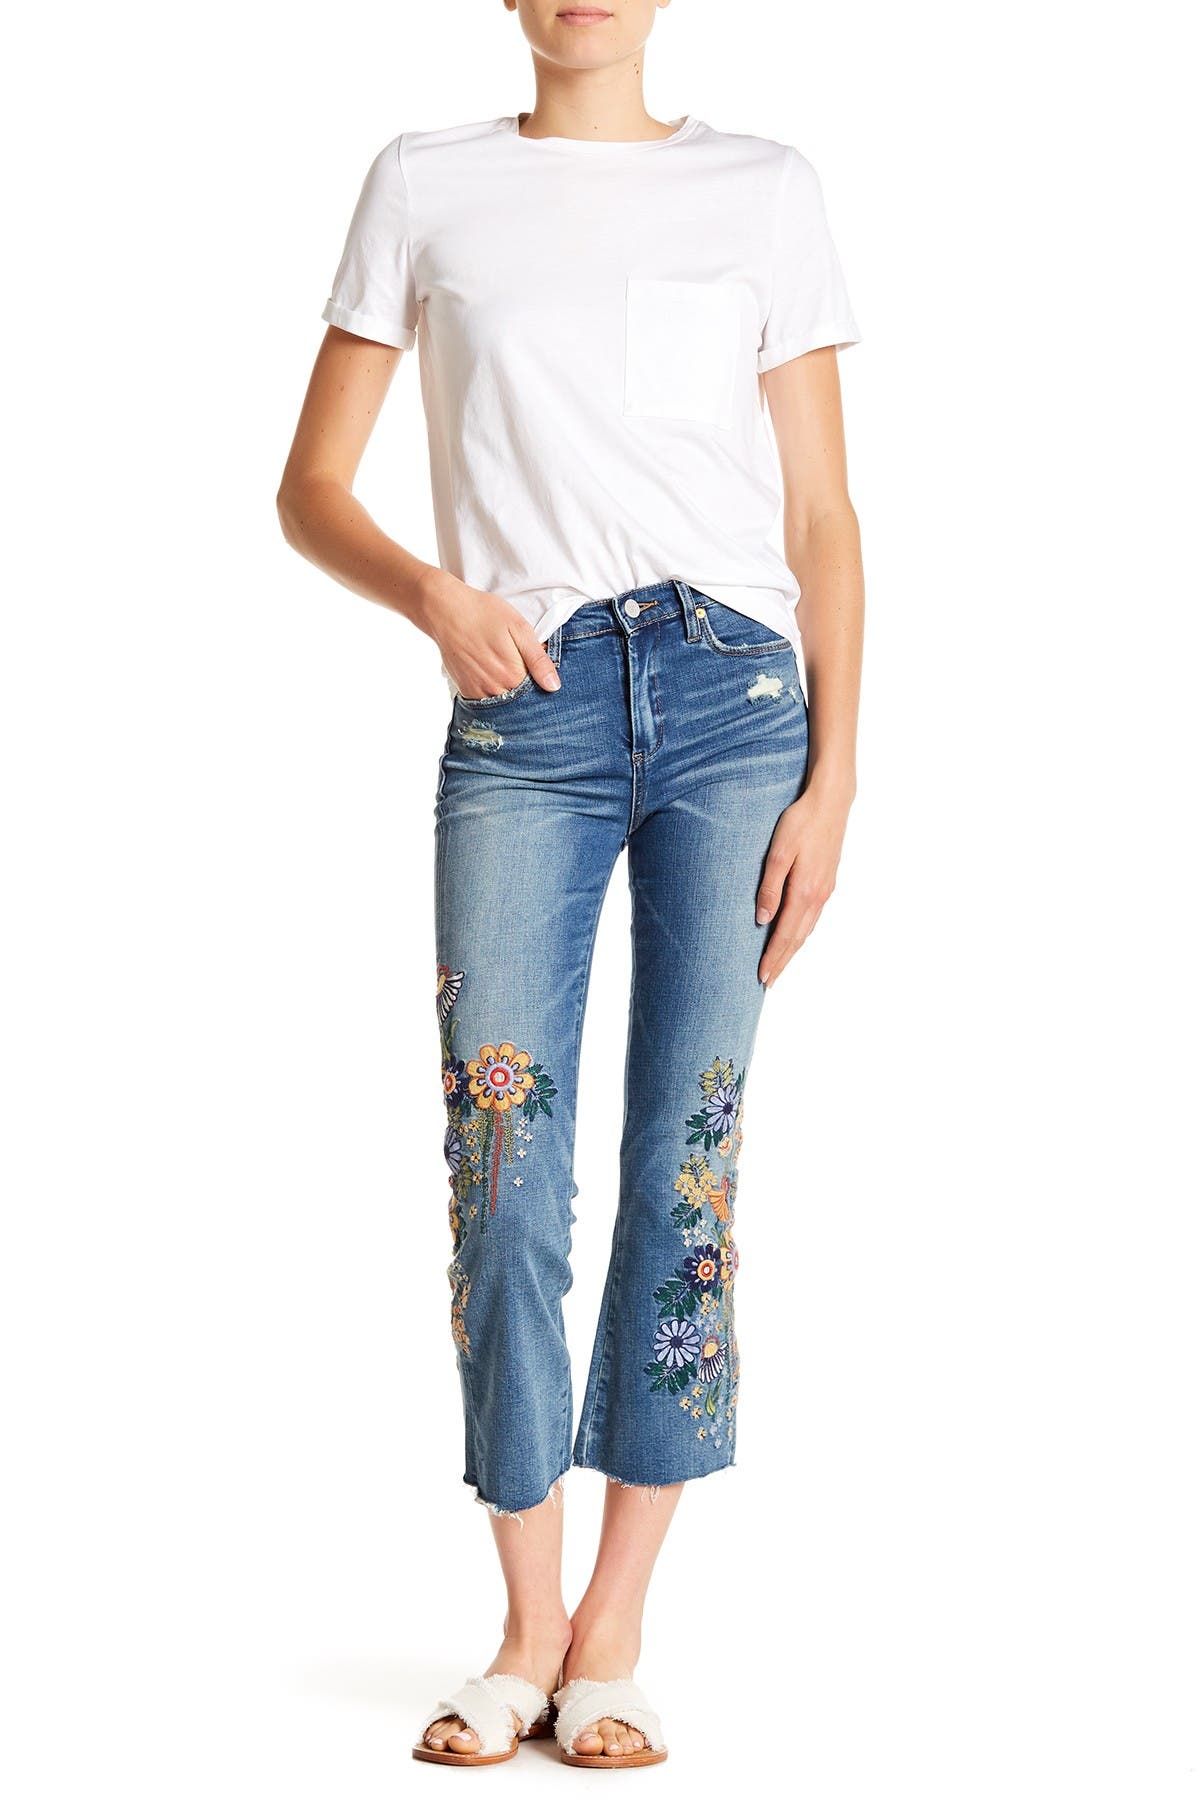 blanknyc embroidered jeans